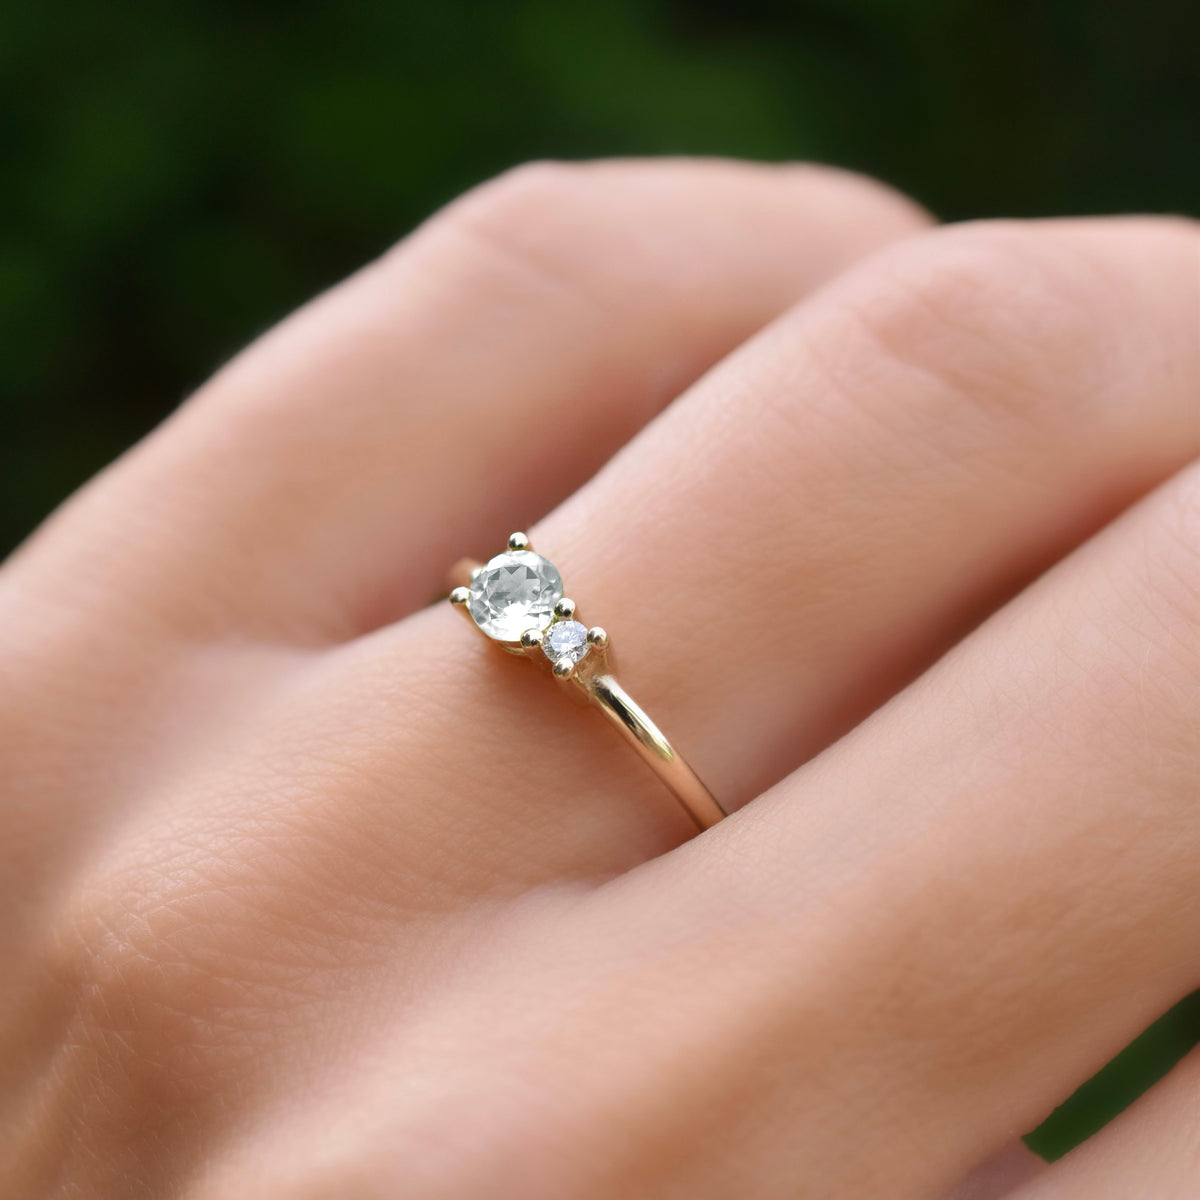 Crystal Clear White Topaz Ring in Sterling Silver – Madelynn Cassin Designs